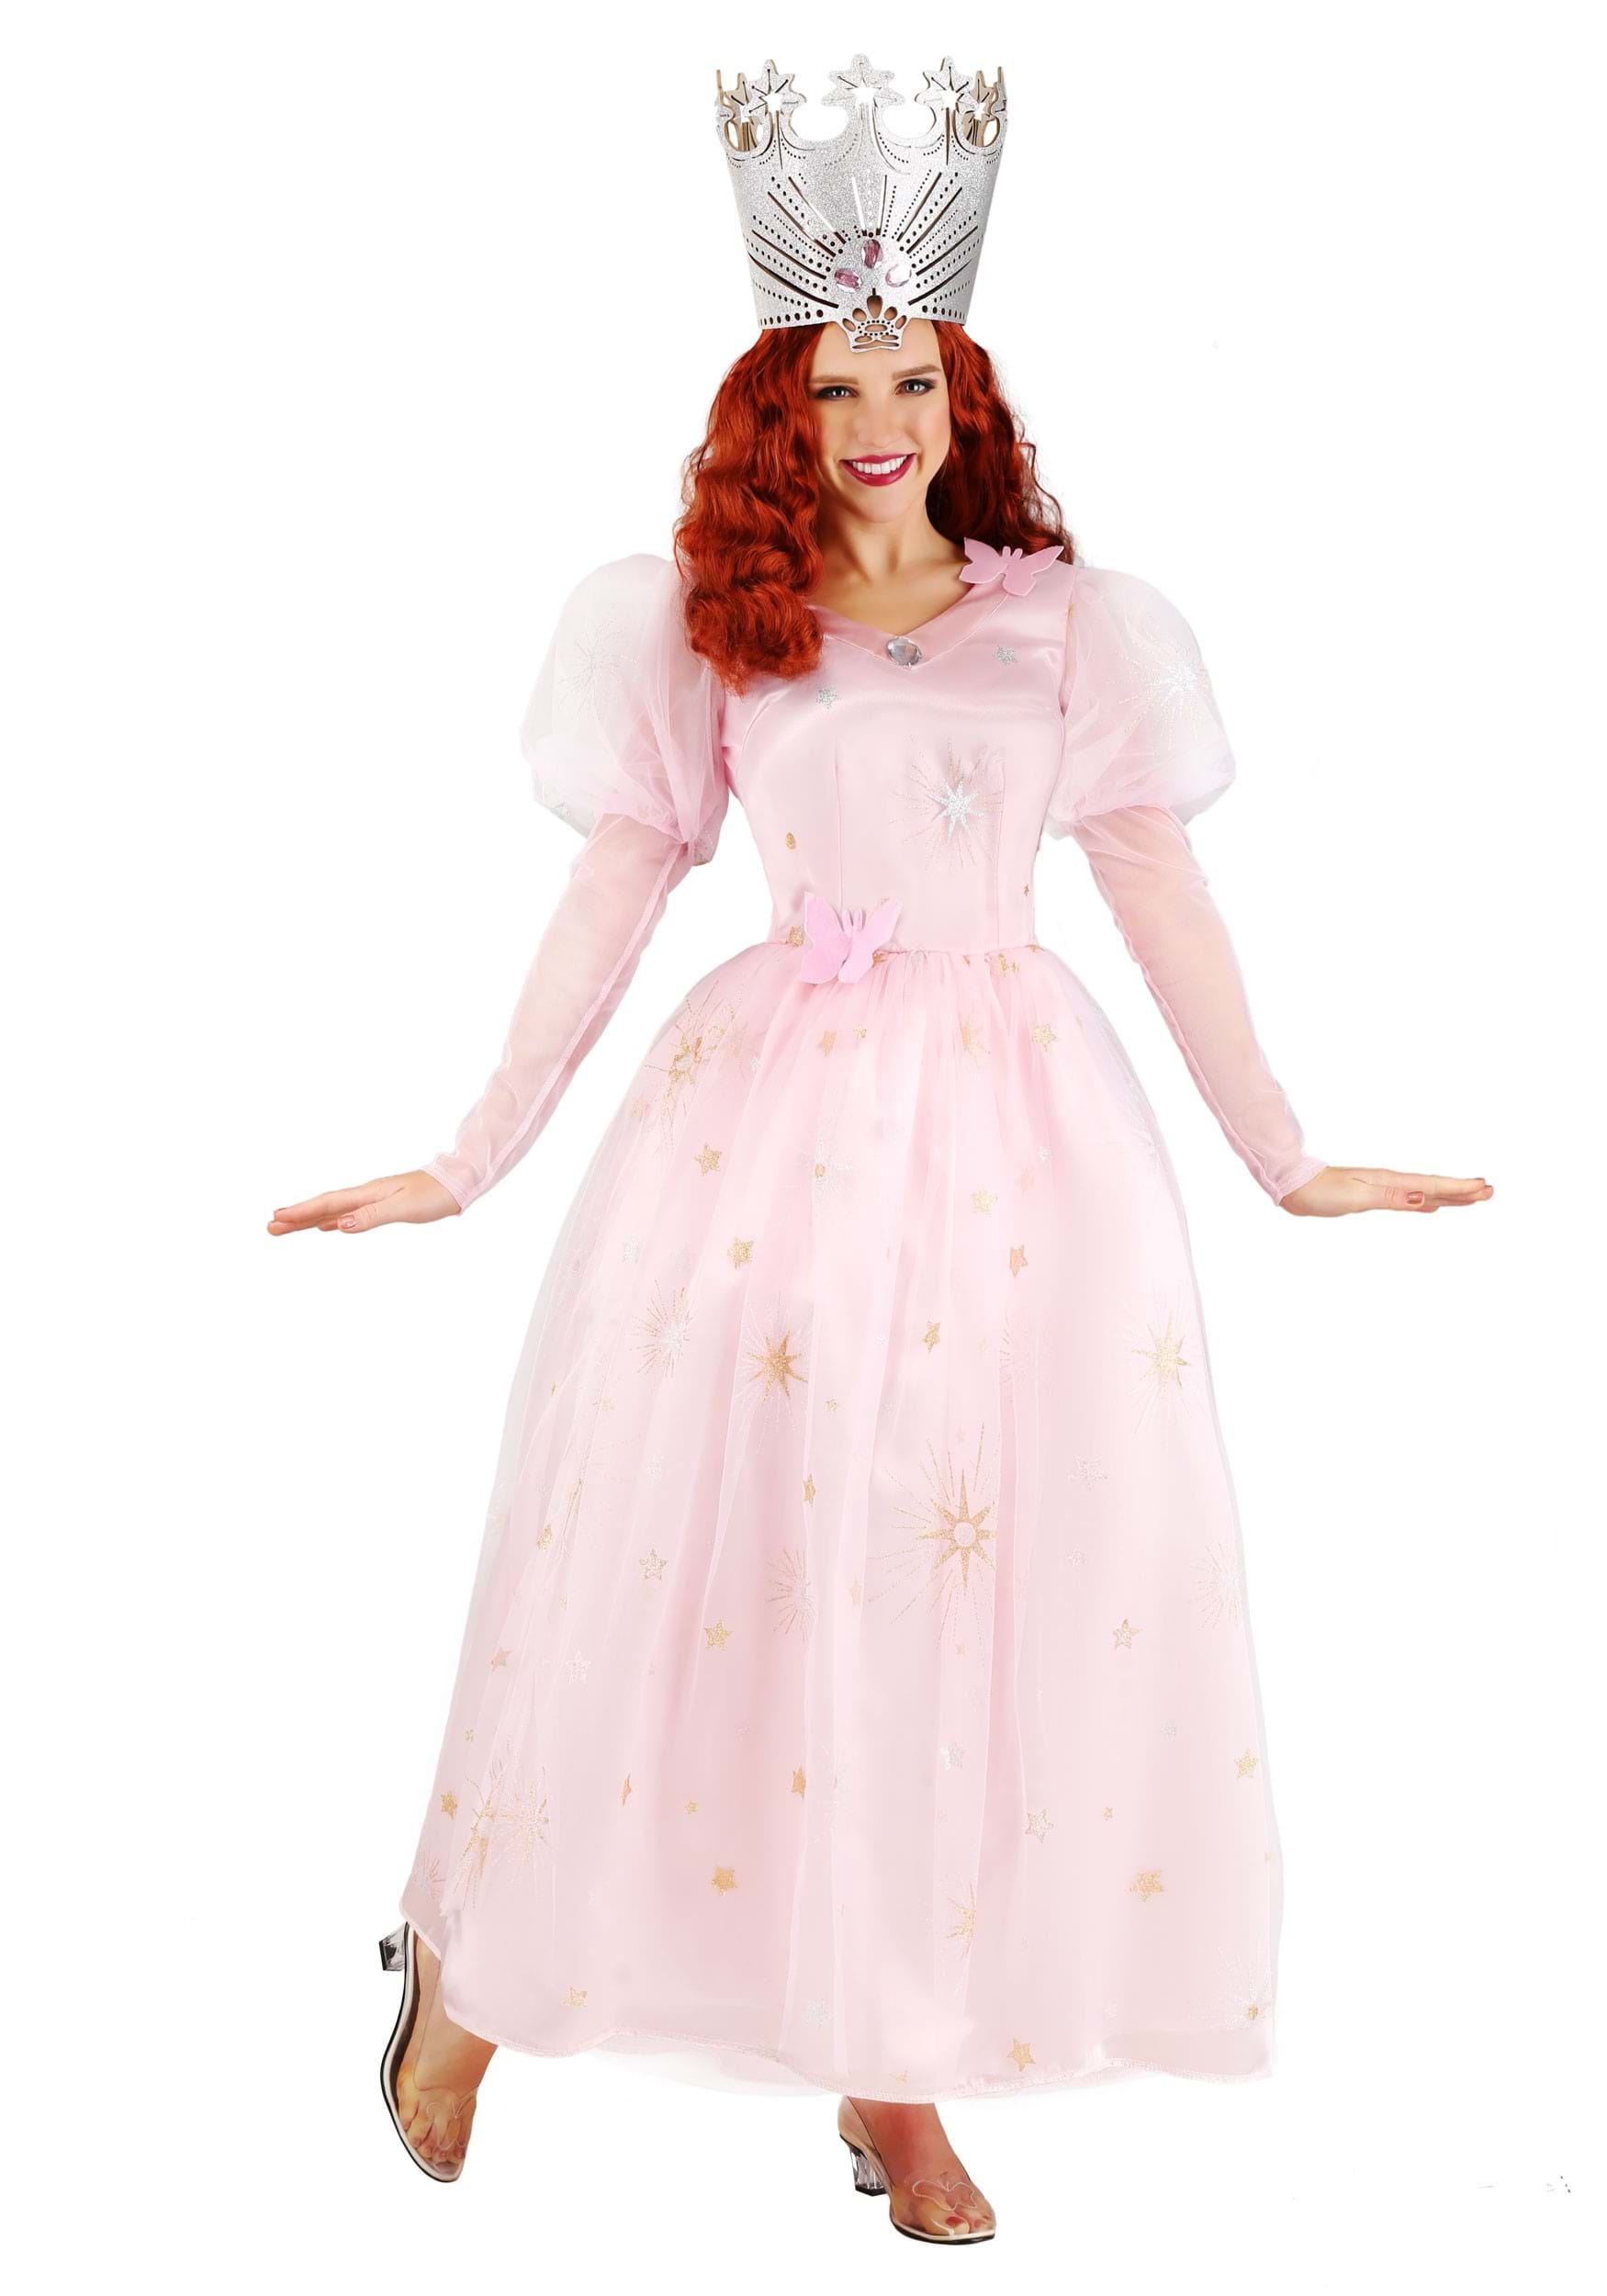 Photos - Fancy Dress Wizard Jerry Leigh  of Oz Glinda Adult Costume Pink/Gray FUN1706AD 